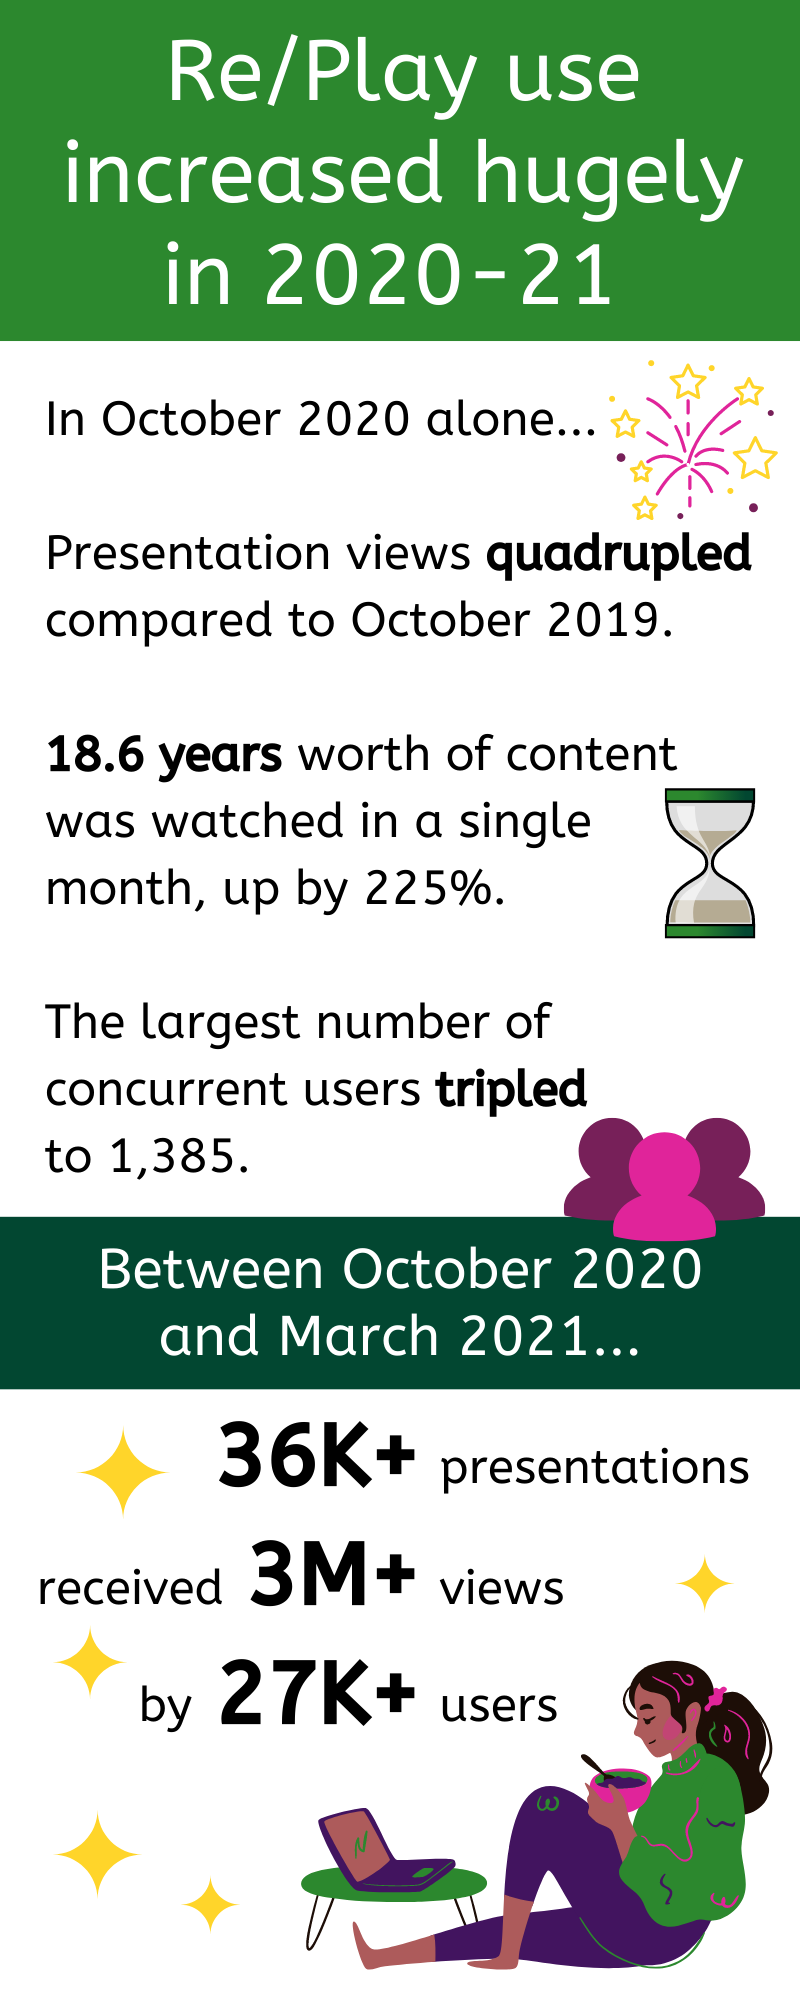 Re/Play use increased hugely in 2020-21. In October alone, presentation views quadrupled compared to October 2019. 18.6 years worth of content was watched in a single month, up by 225%. The largest number of concurrent users tripled to 1385. Between October 2020 and March 2021, 36K+ presentations received 3M+ views by 27K+ users.